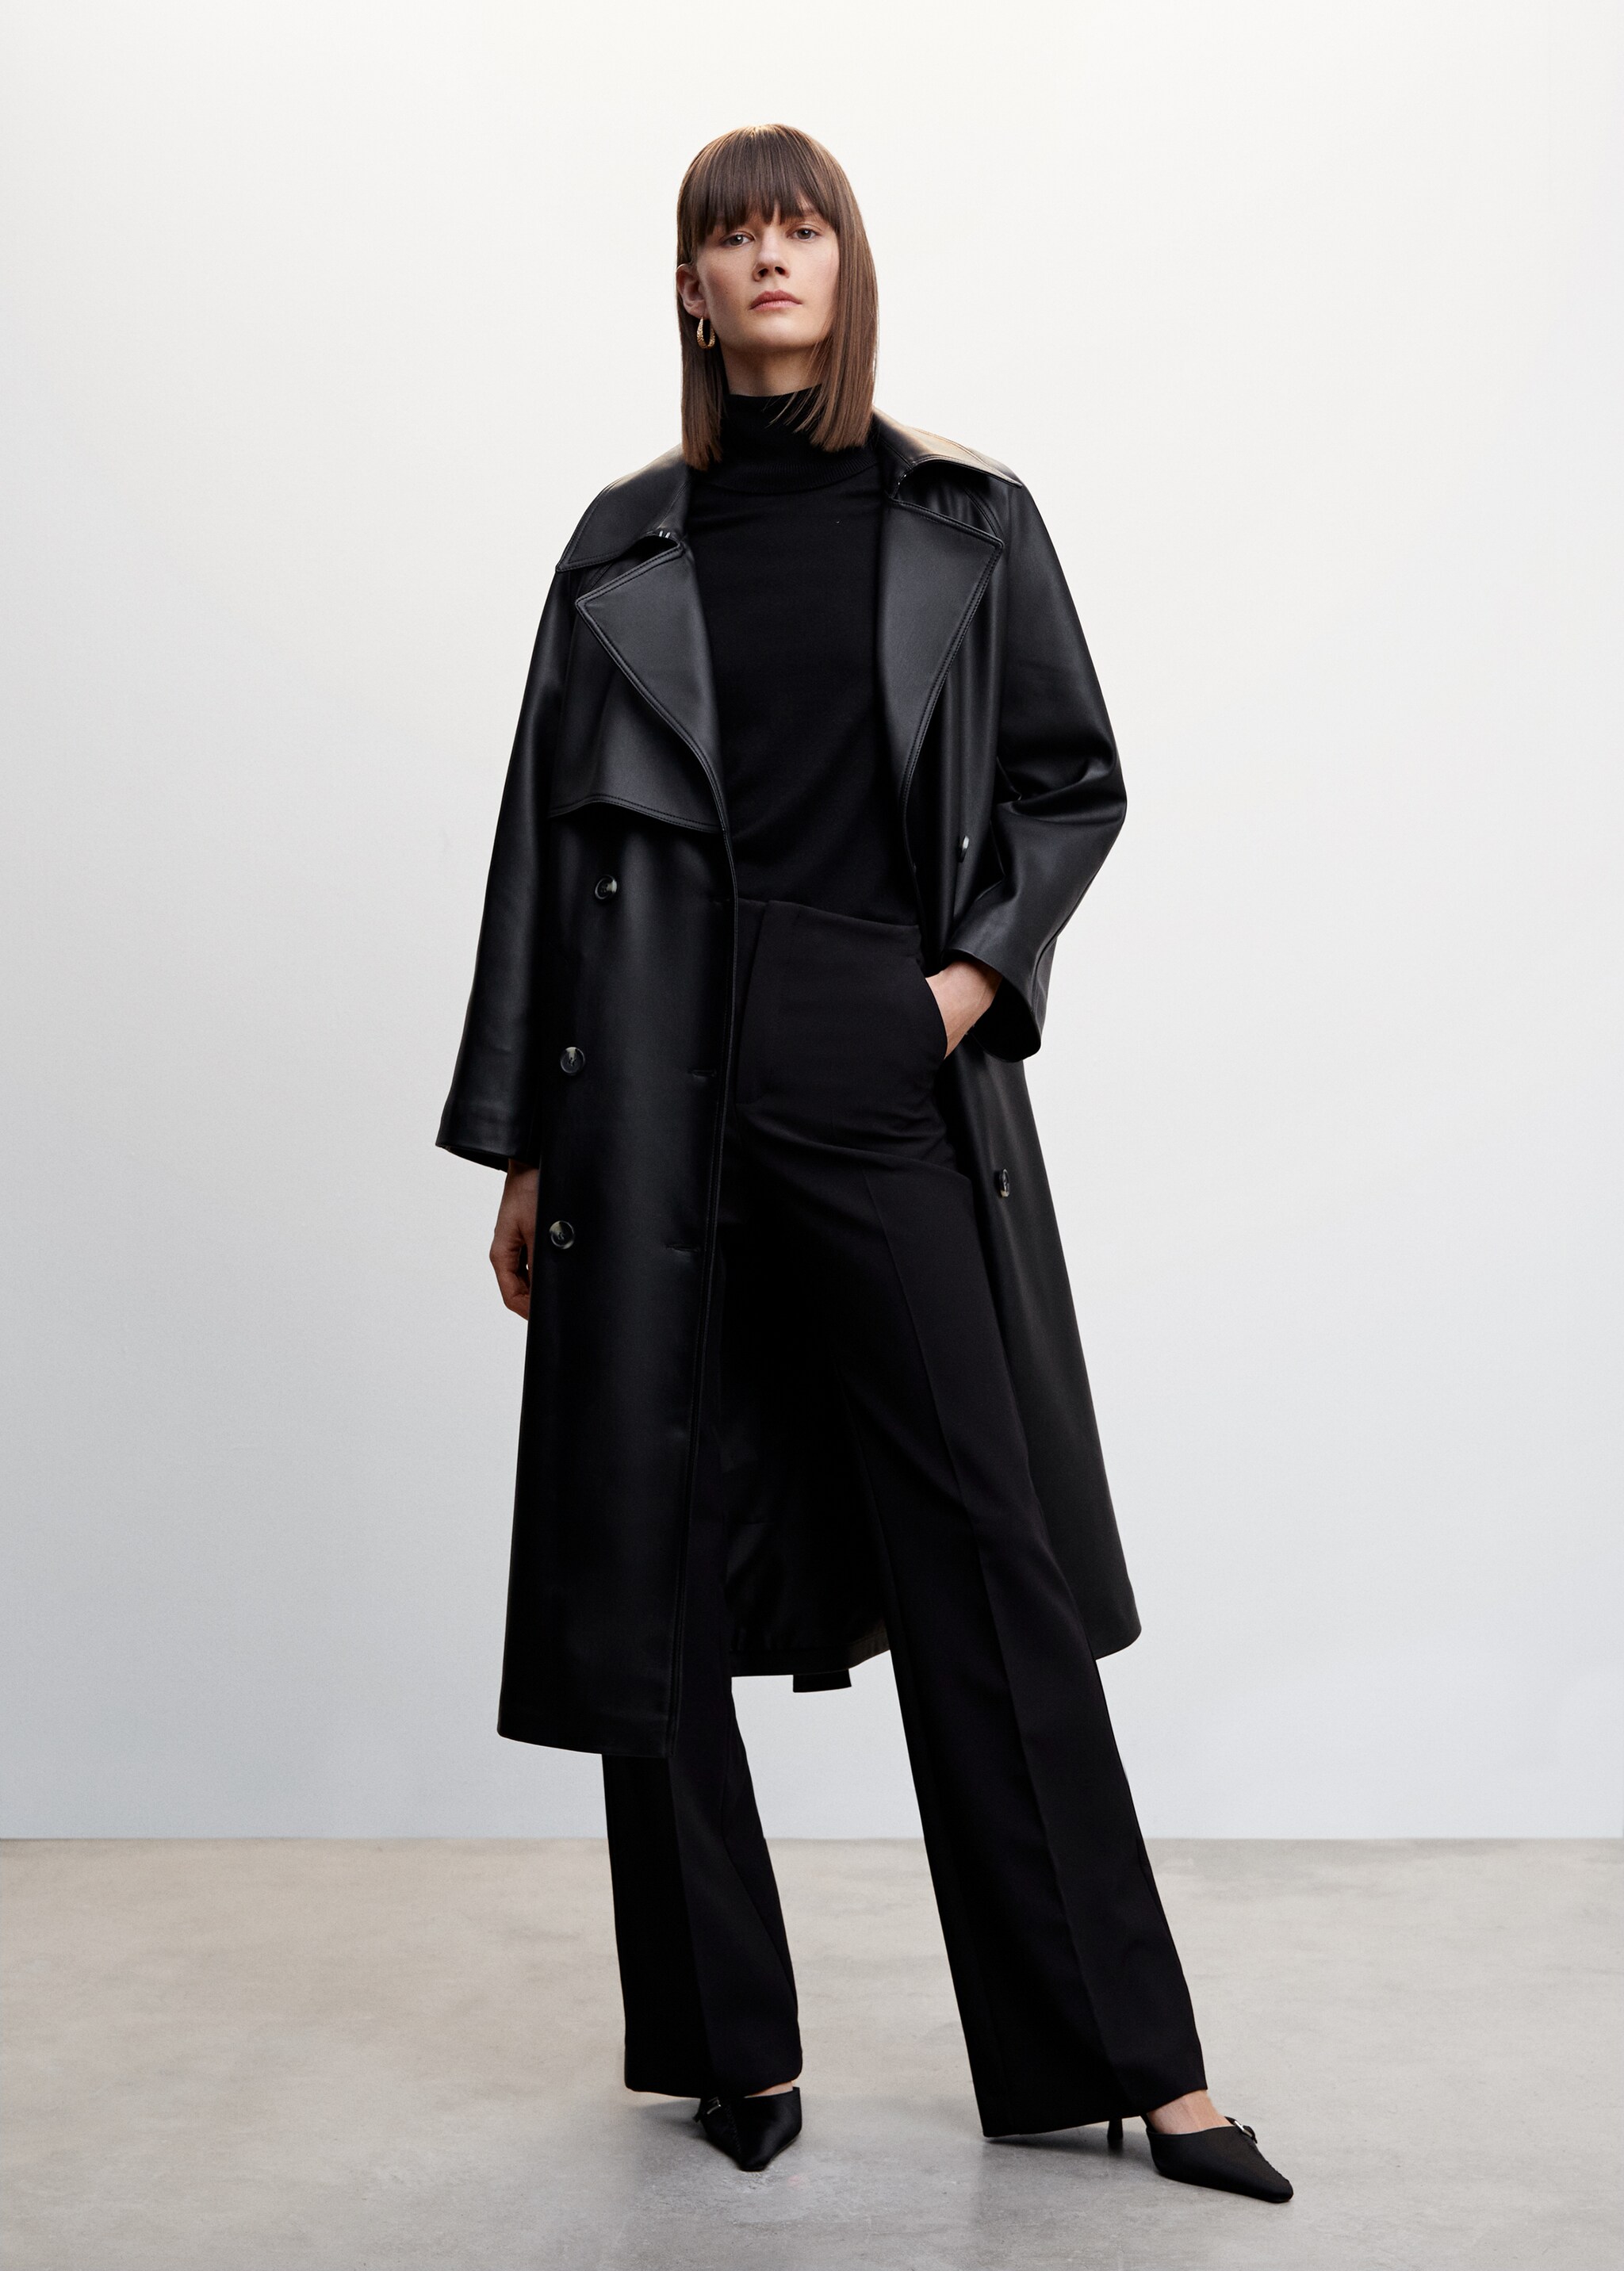 Oversize leather-effect trench coat - General plane